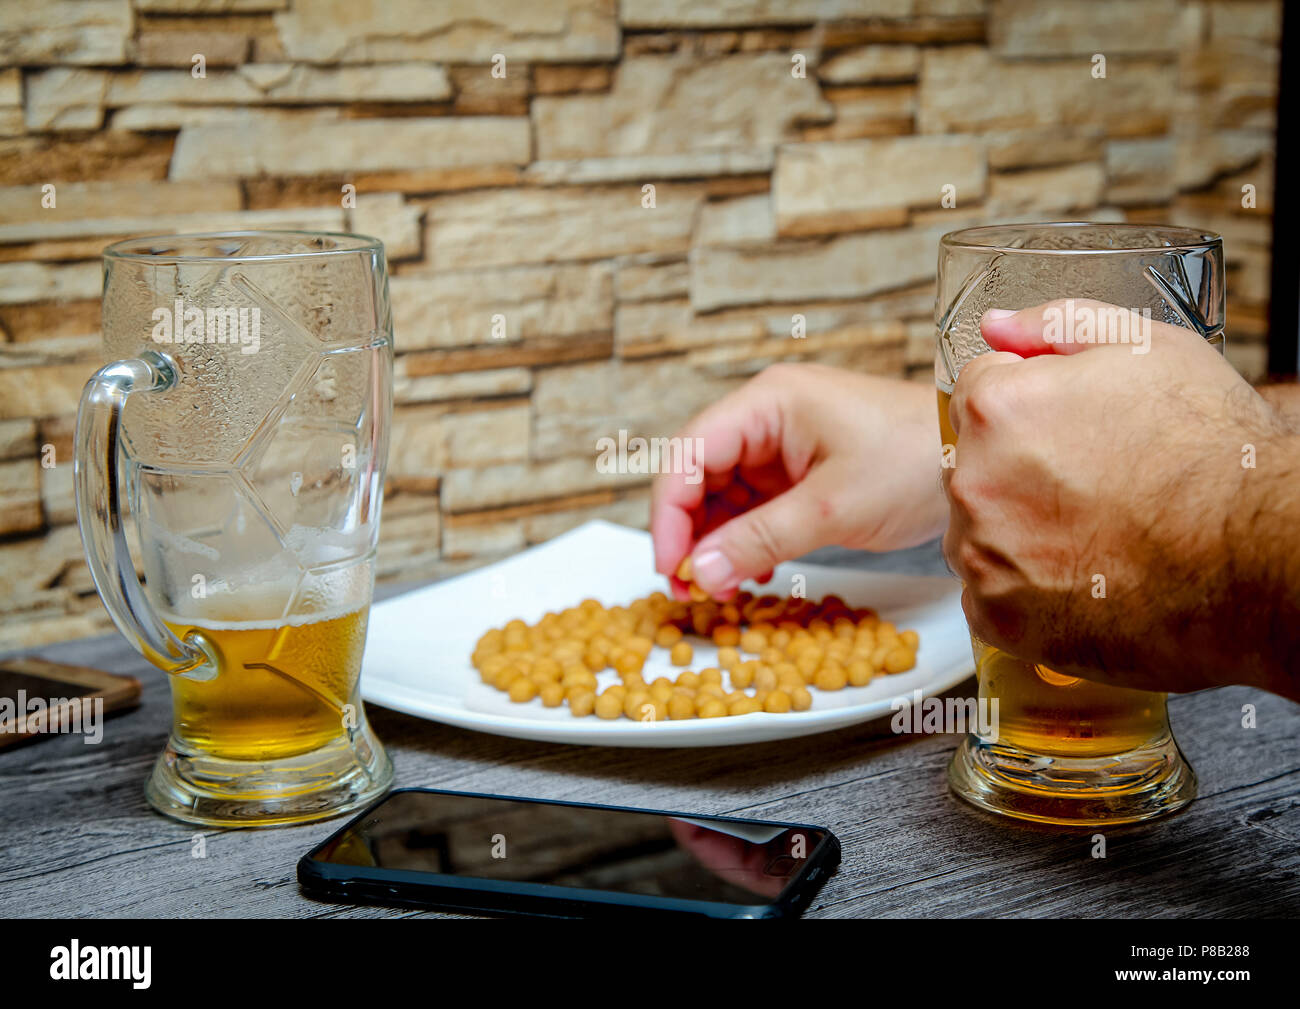 Close-up of men's hands holding a glass of beer and taking nuts from a plate. Stock Photo